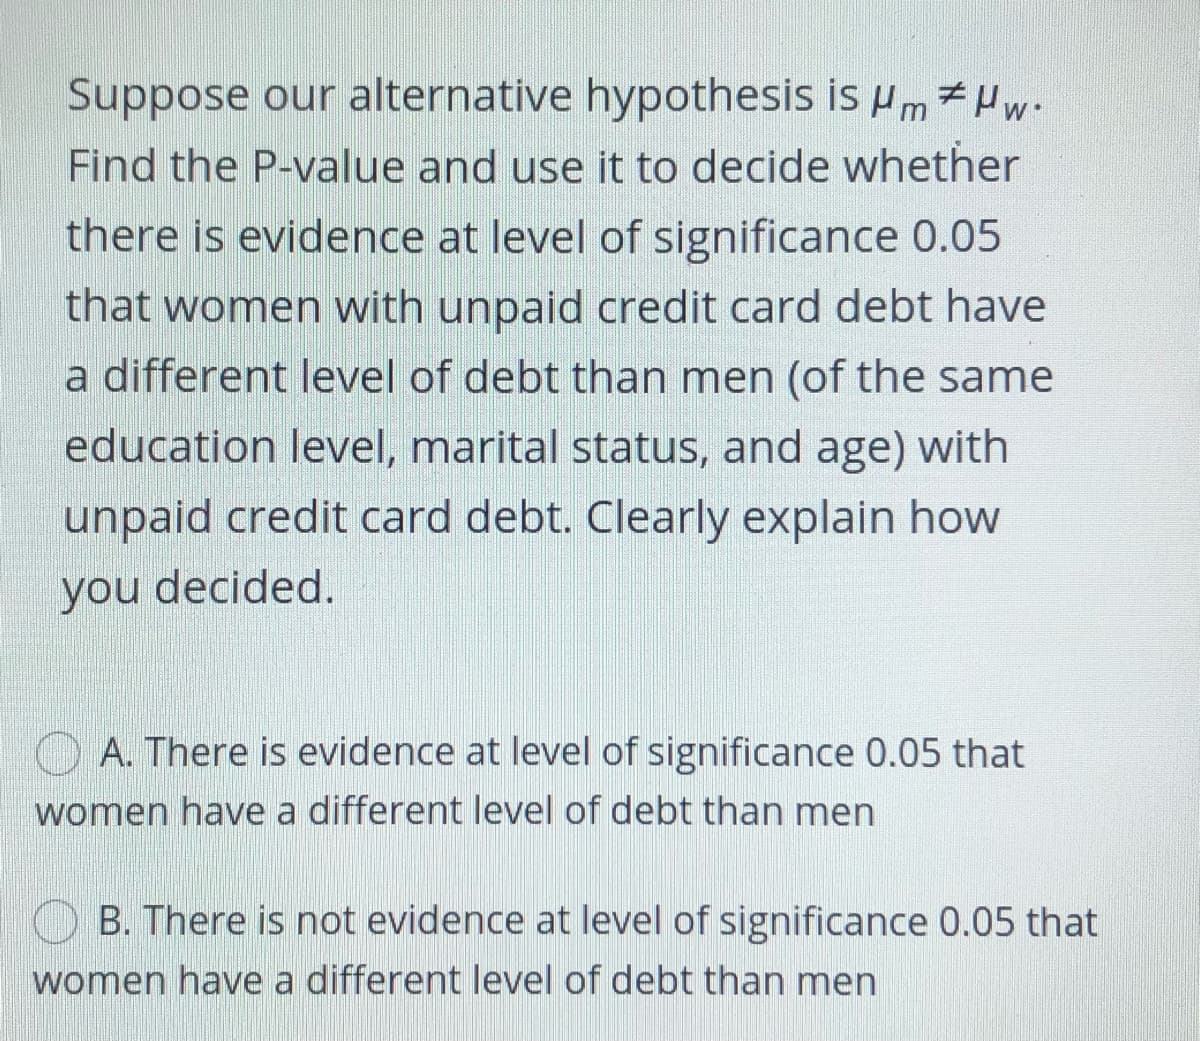 Suppose our alternative hypothesis is um 7Hw-
Find the P-value and use it to decide whether
there is evidence at level of significance 0.05
that women with unpaid credit card debt have
a different level of debt than men (of the same
education level, marital status, and age) with
unpaid credit card debt. Clearly explain how
you decided.
O A. There is evidence at level of significance 0.05 that
women have a different level of debt than men
B. There is not evidence at level of significance 0.05 that
women have a different level of debt than men
